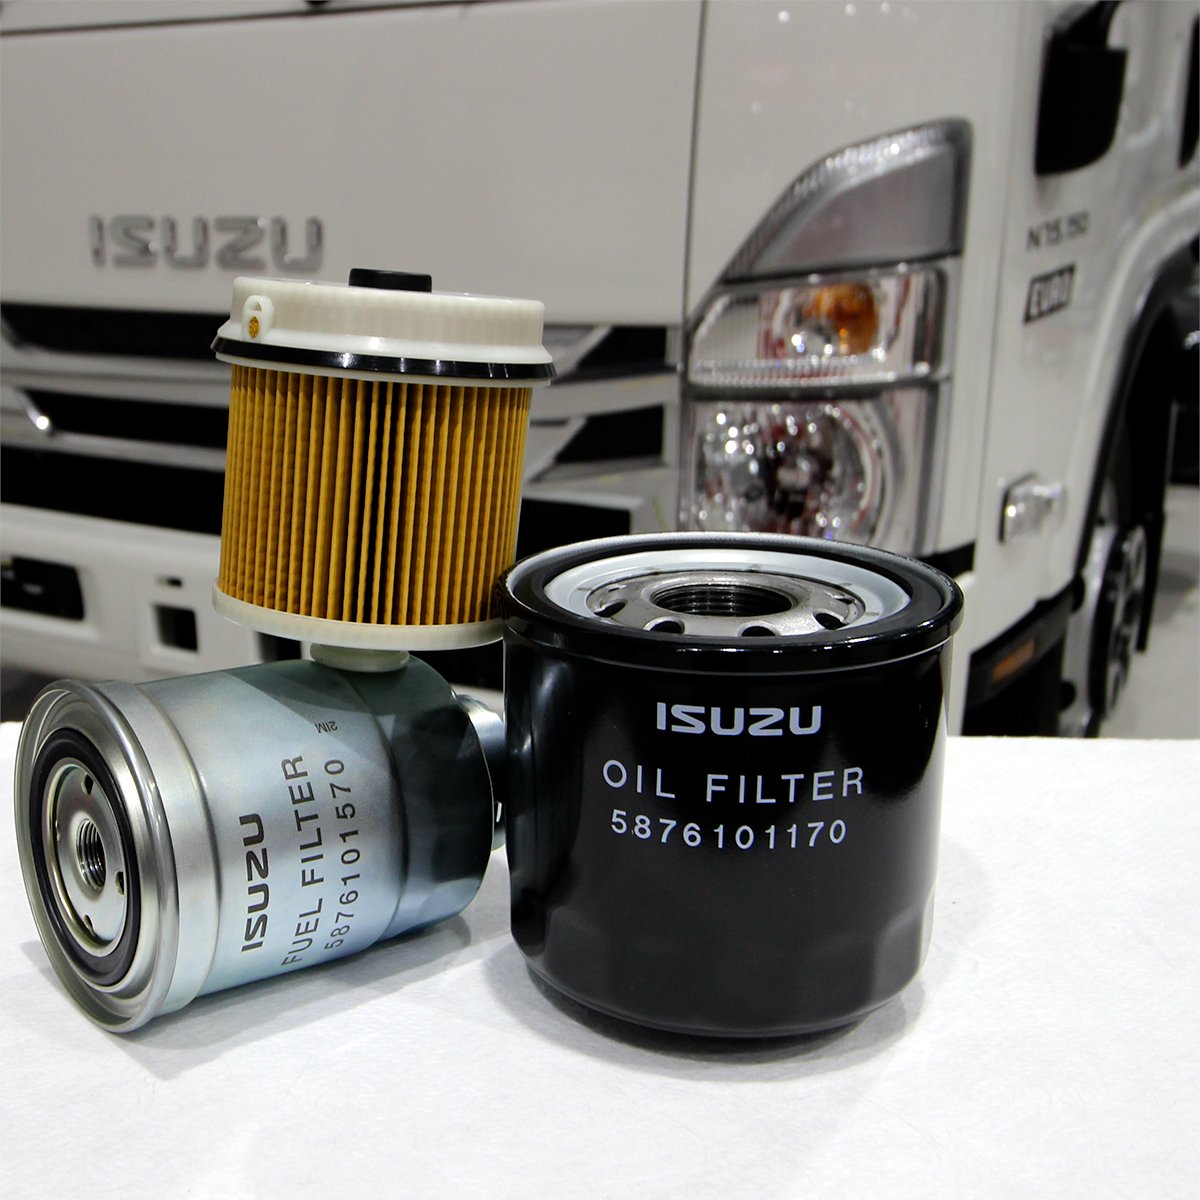 Did you hear about Isuzu's Best Value Parts range 🔧
 
 ✅ Includes a selection of service parts
 ✅ Available at your local Isuzu truck dealer
 
Head over to our website to find an Isuzu truck dealer near you!

 #Isuzuparts #dealernetwork #commercialvehicles #trucks